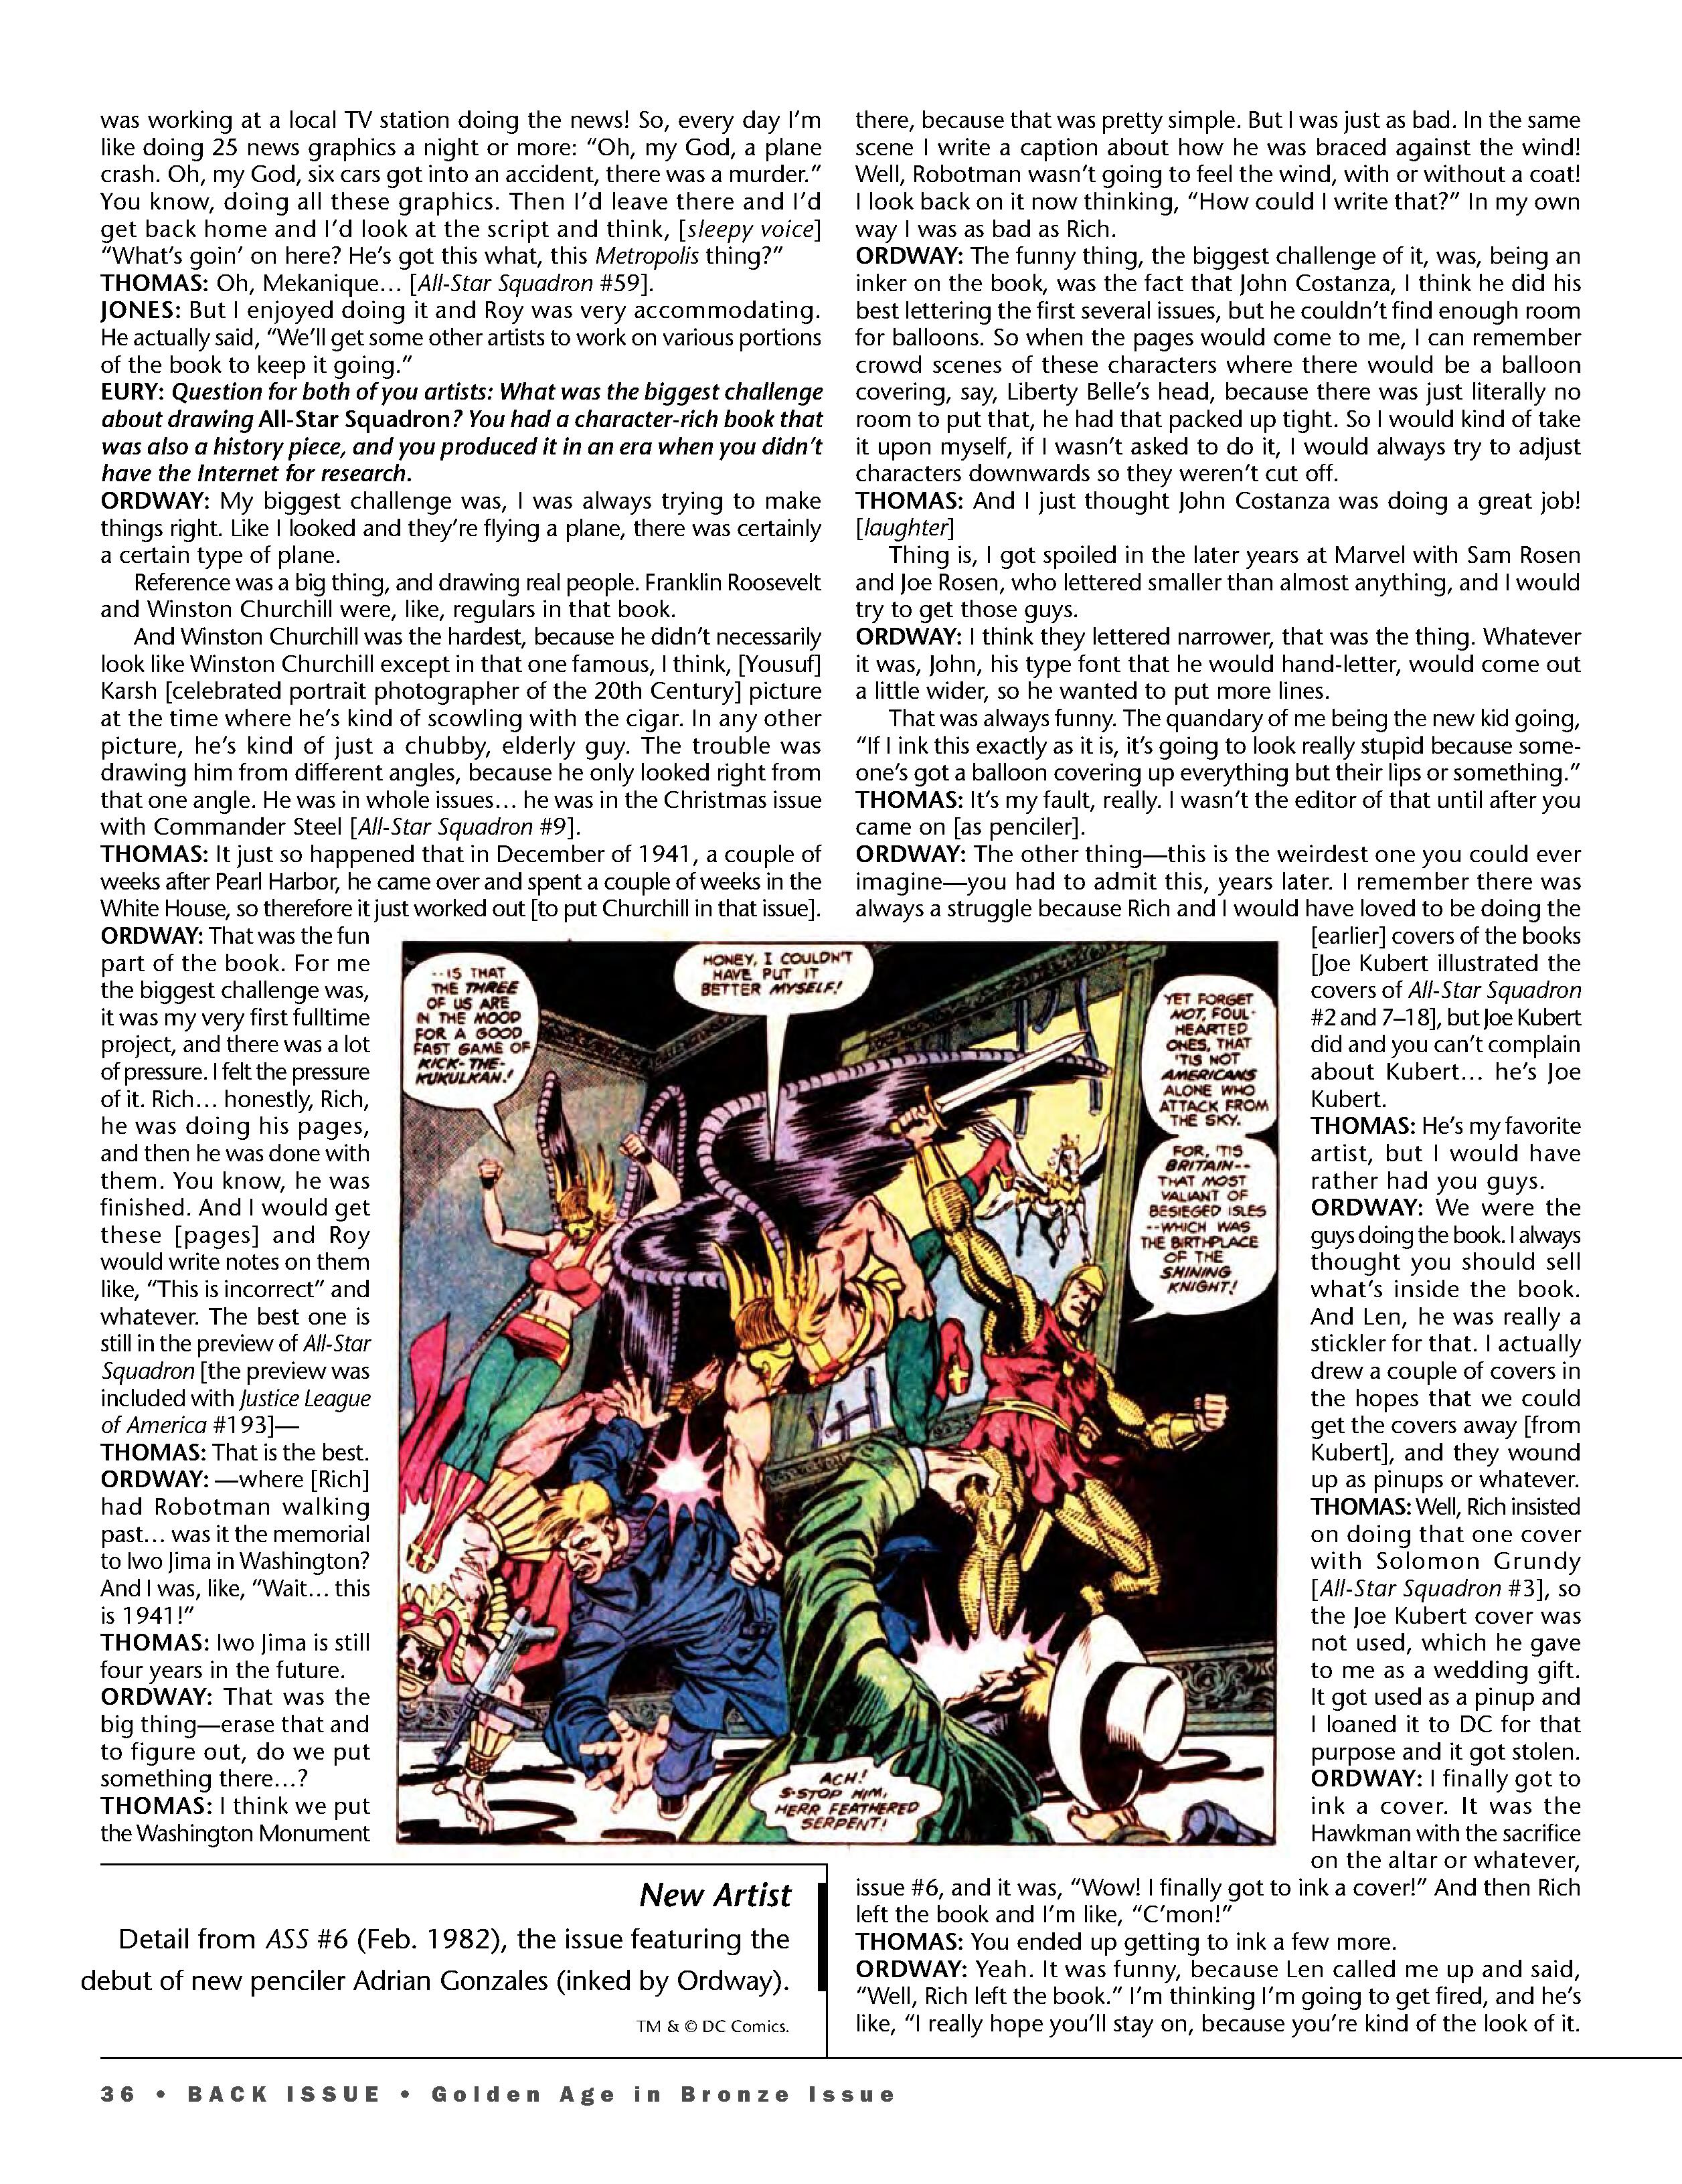 Read online Back Issue comic -  Issue #106 - 38